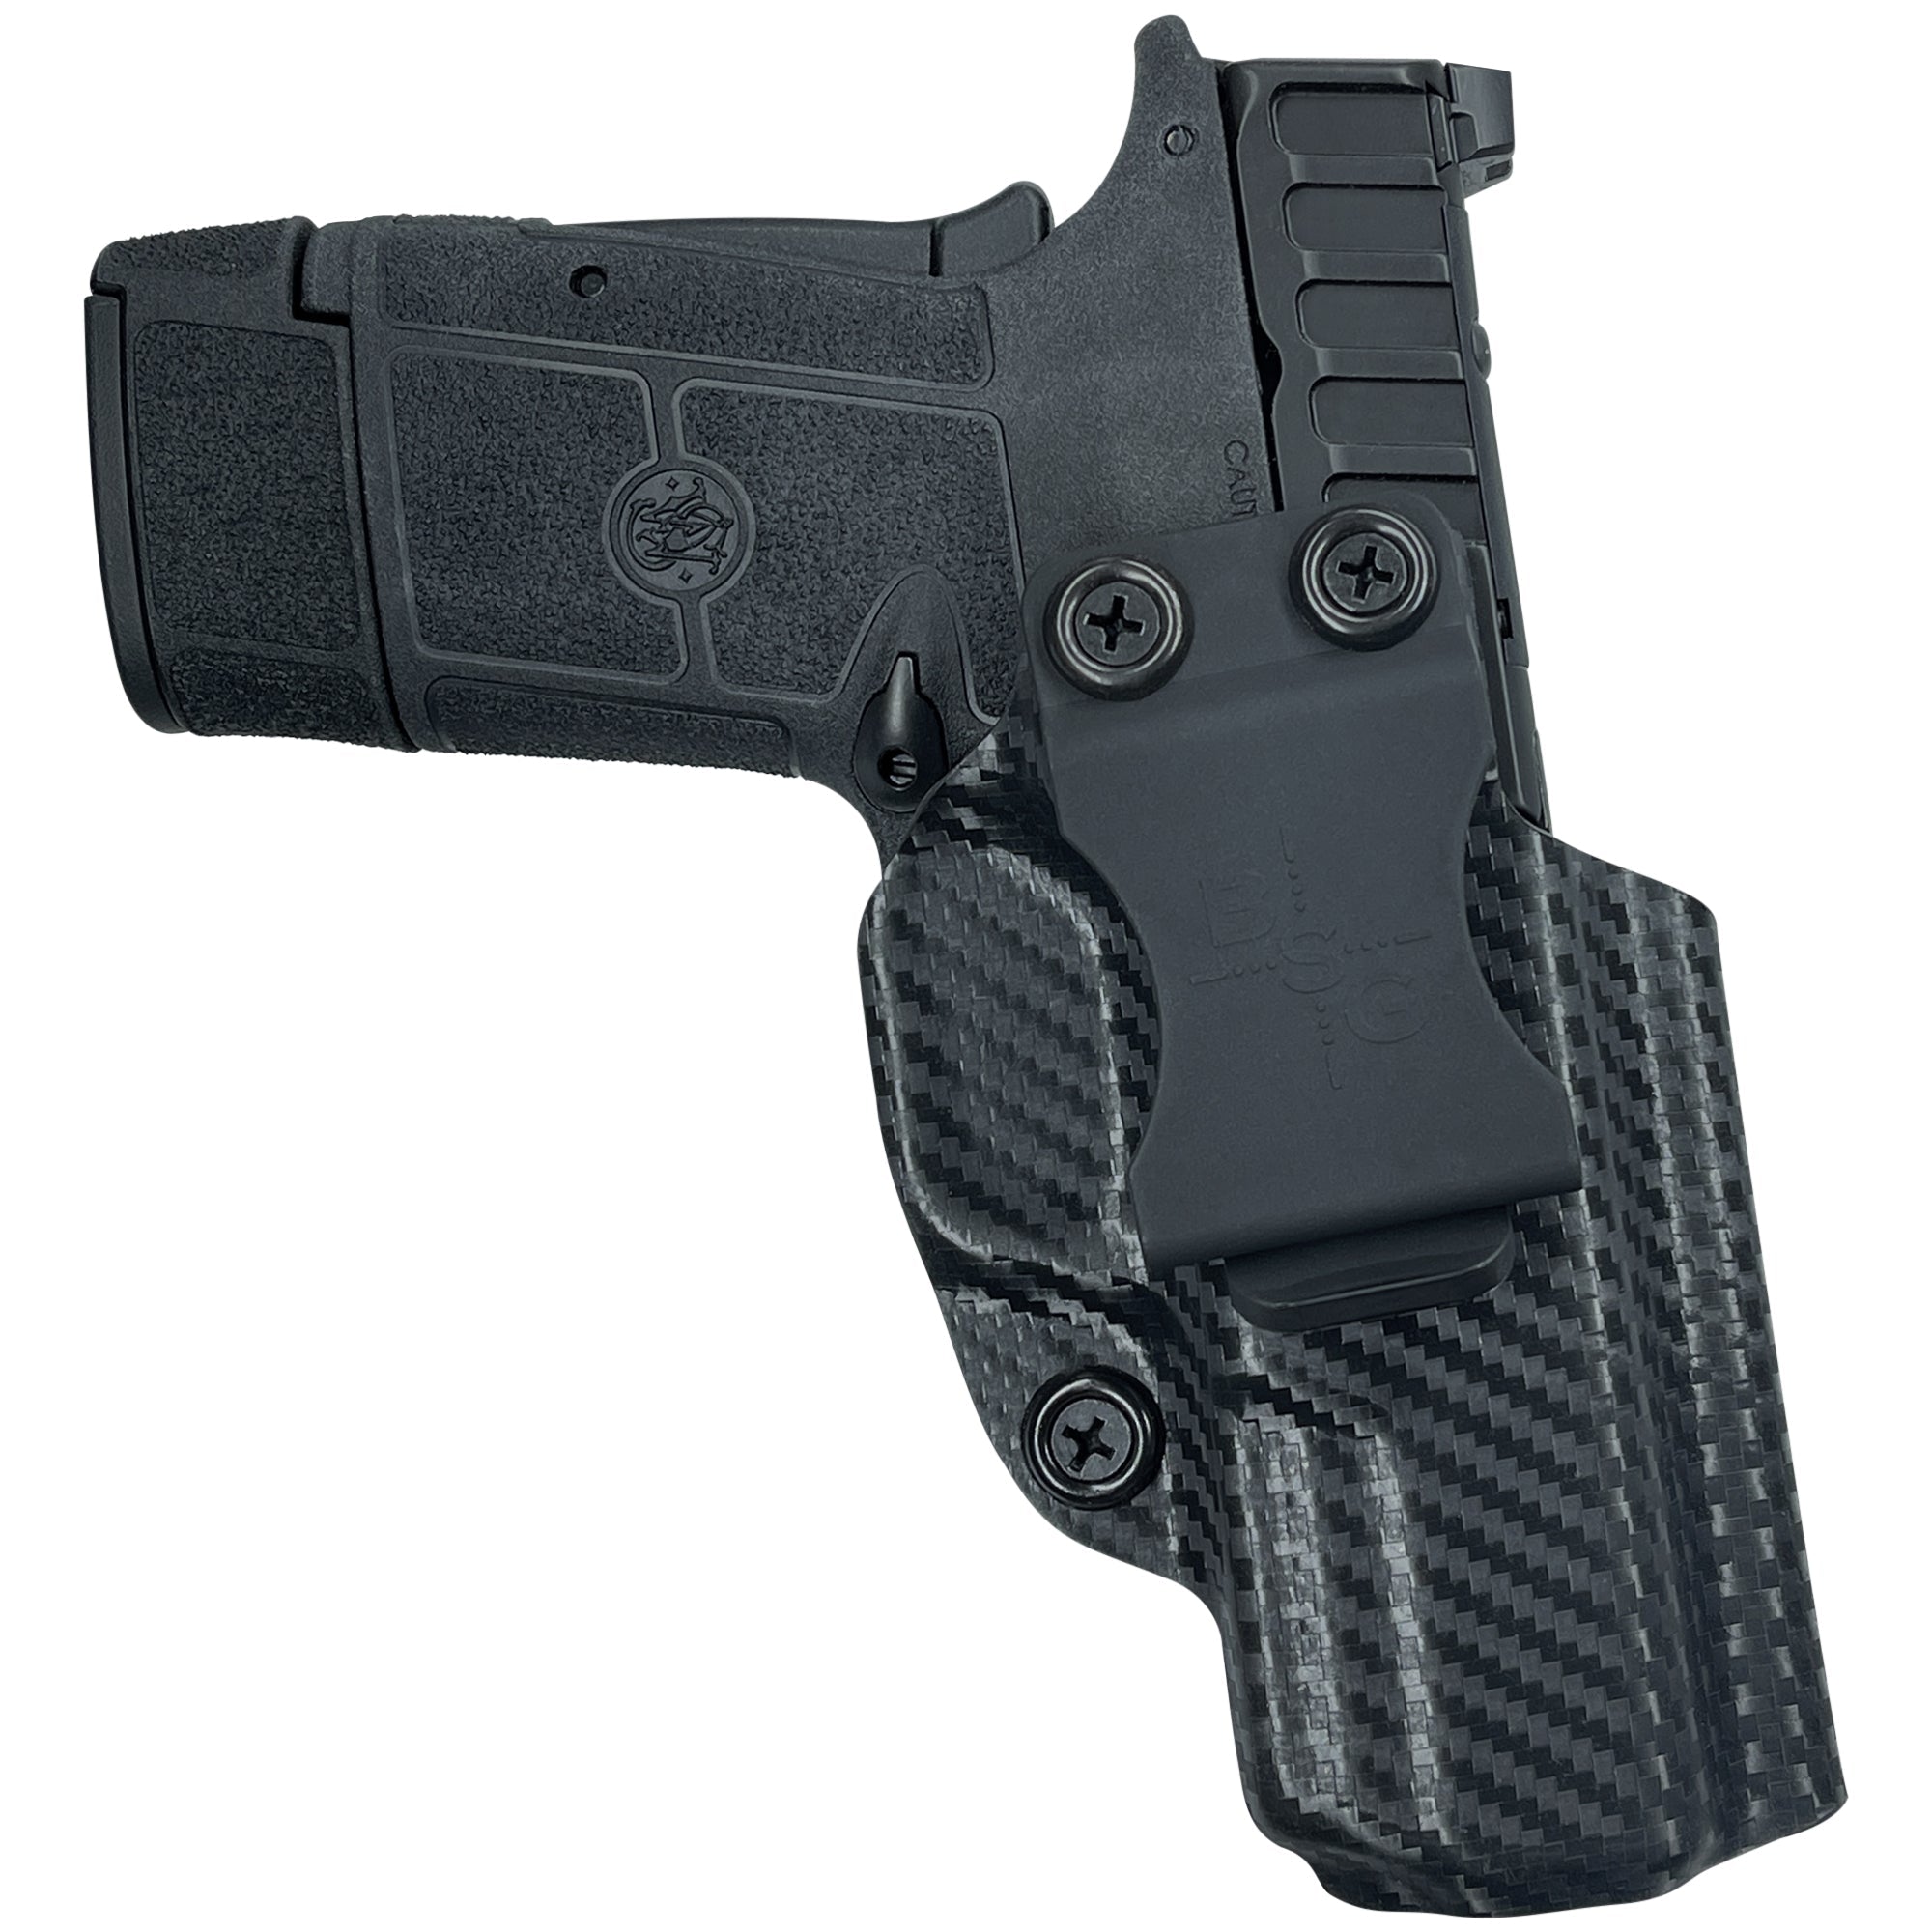 Smith & Wesson Equalizer IWB Sweat Guard Holster